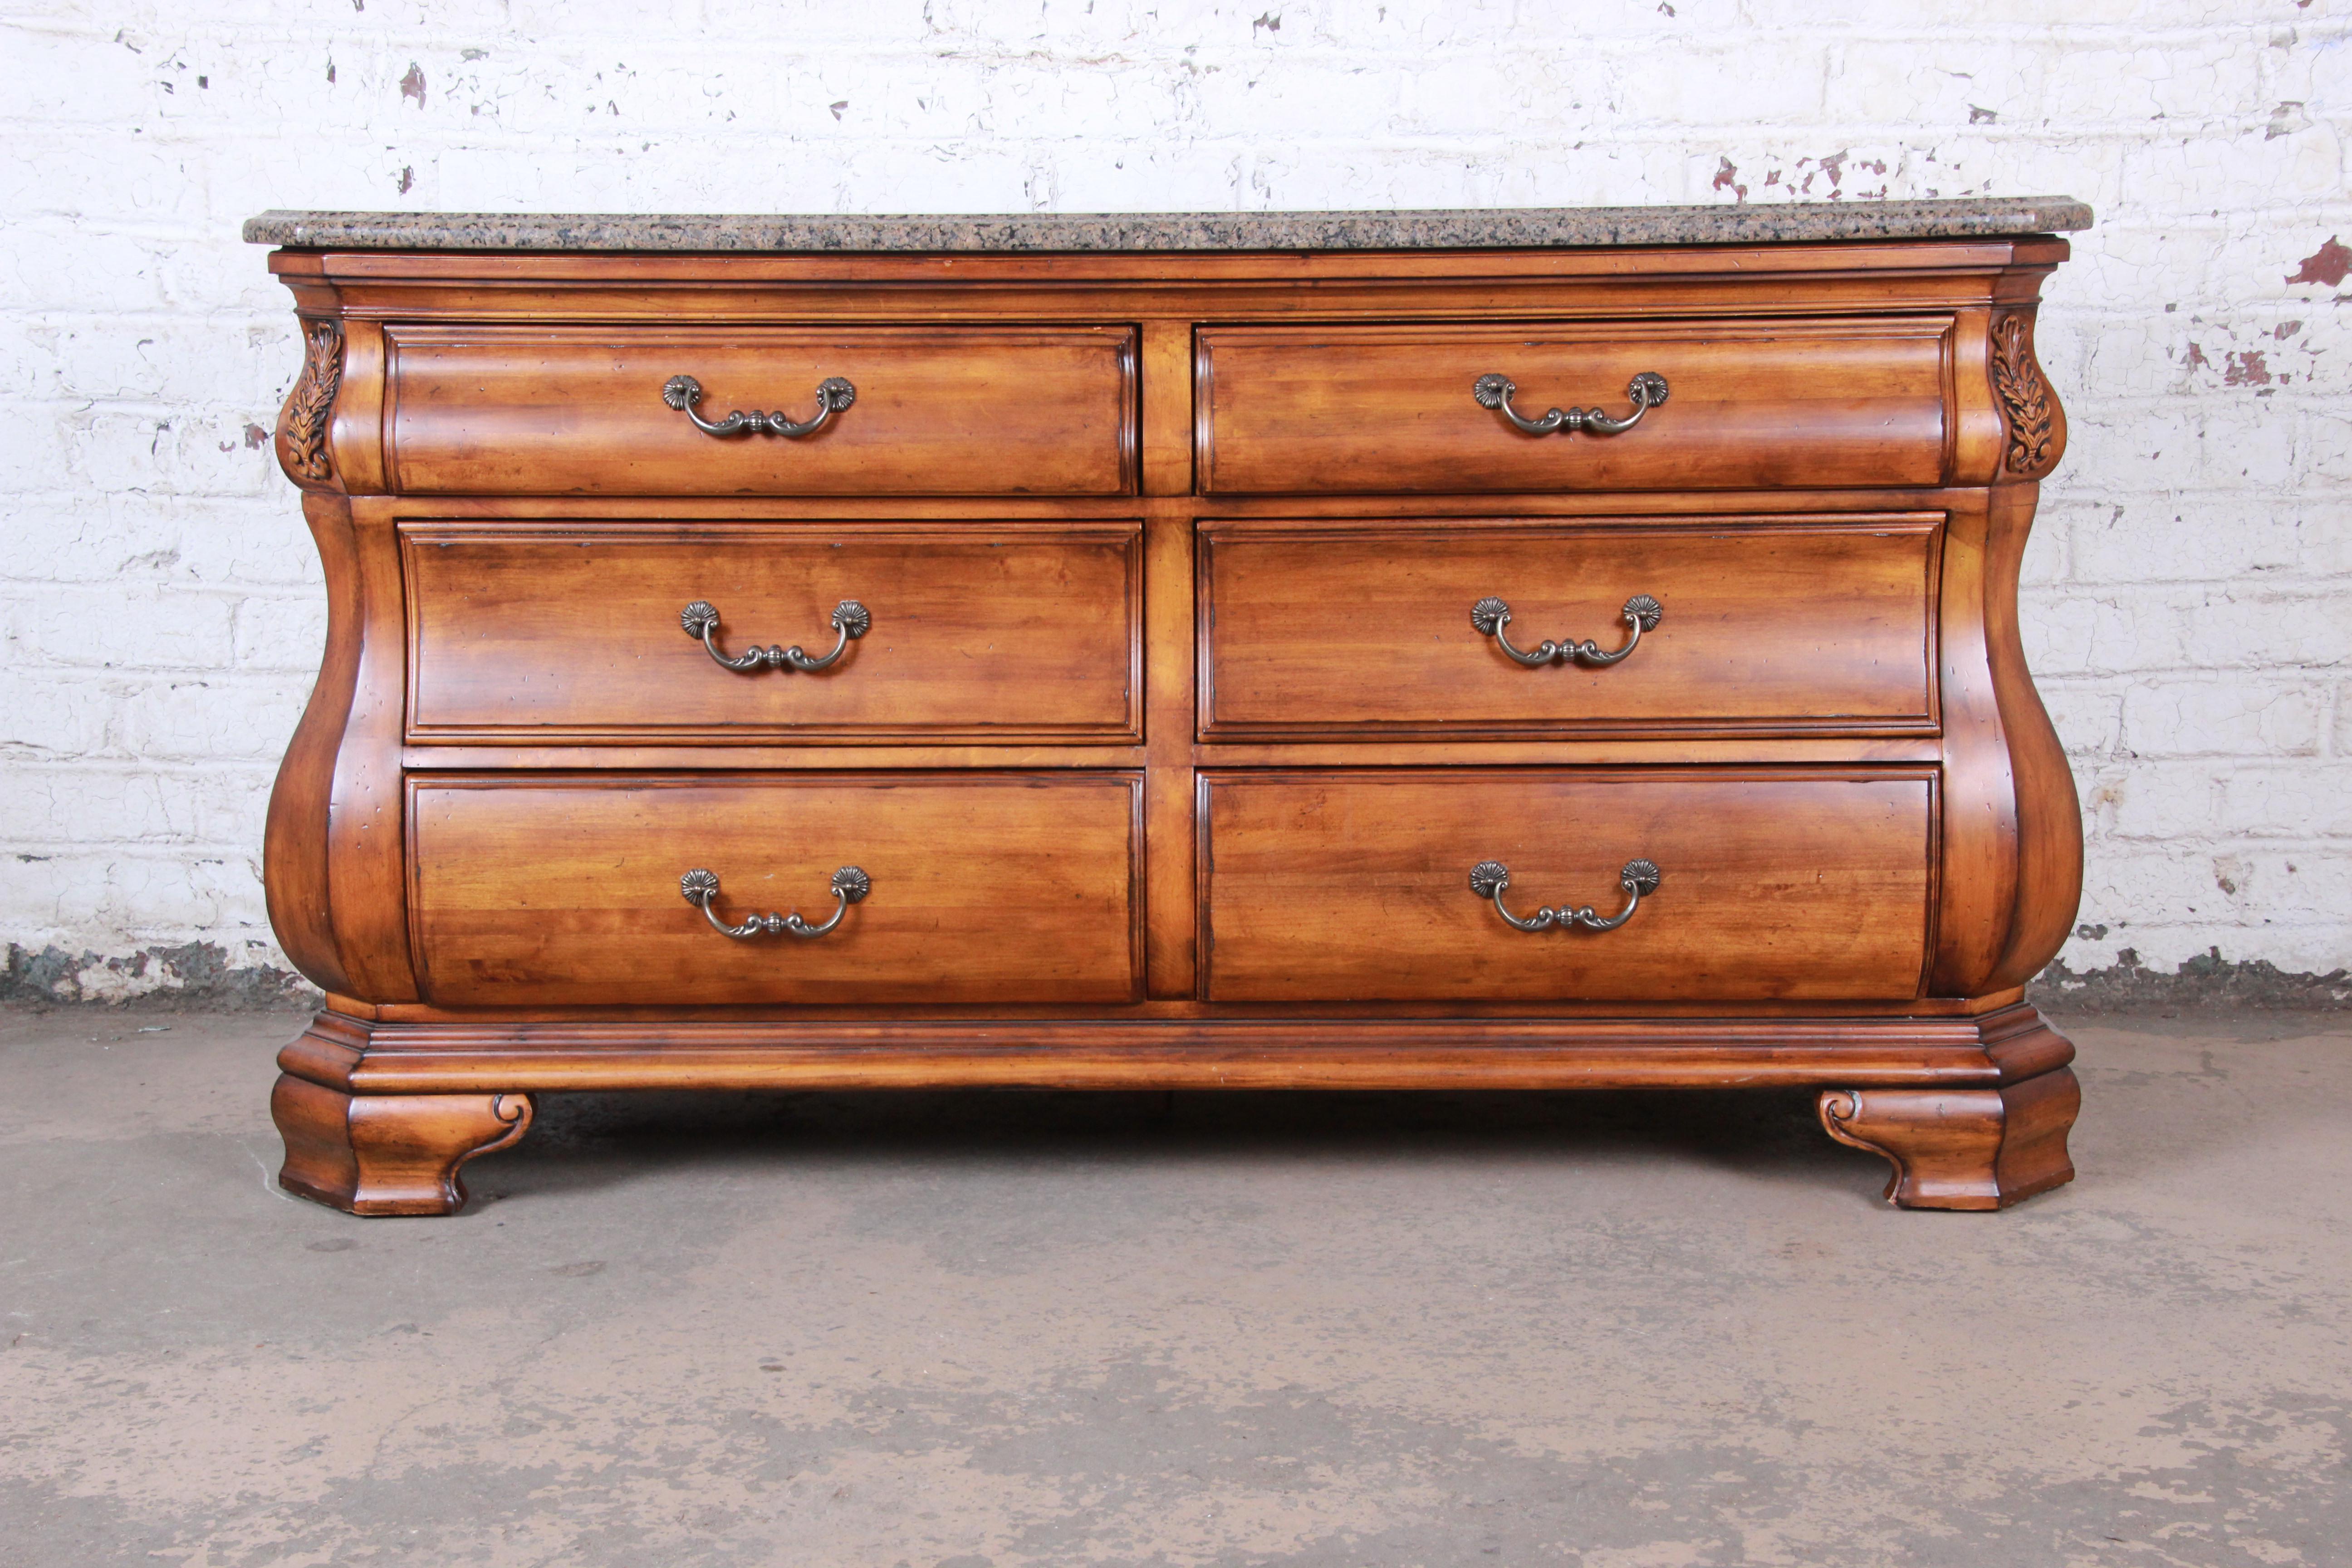 An exceptional Italian style carved wood dresser or credenza by Ethan Allen. The dresser features gorgeous wood grain with nice carved details and a stunning beveled granite top. It is very well made, with solid wood construction and dovetail